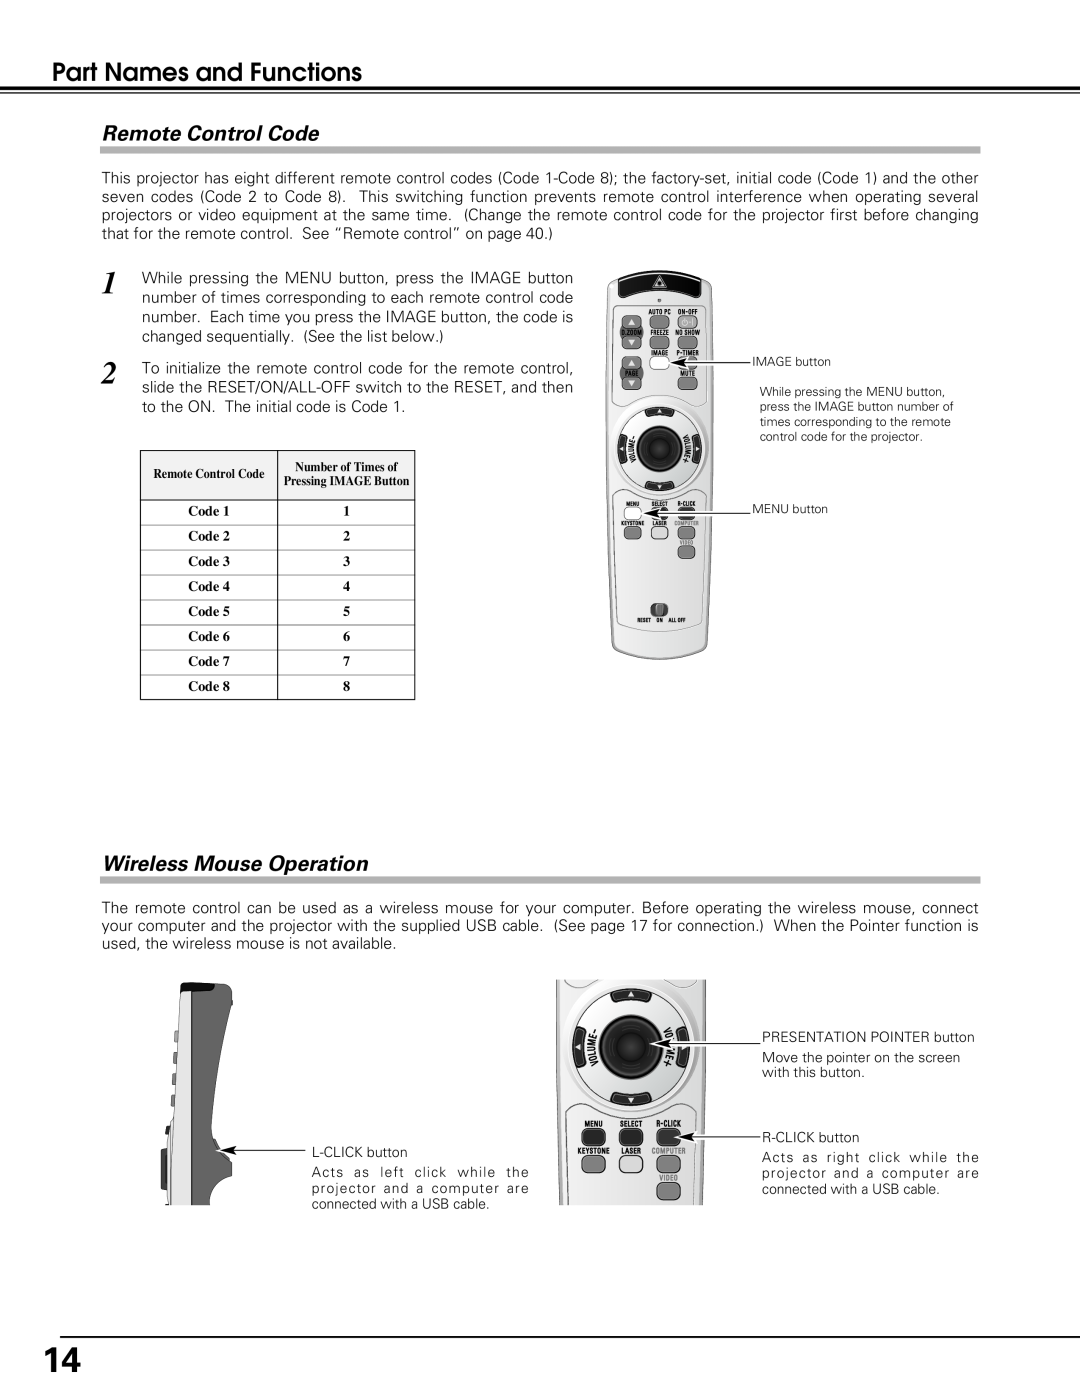 Eiki LC-XB15 Remote Control Code, Wireless Mouse Operation, Part Names and Functions, to the ON. The initial code is Code 